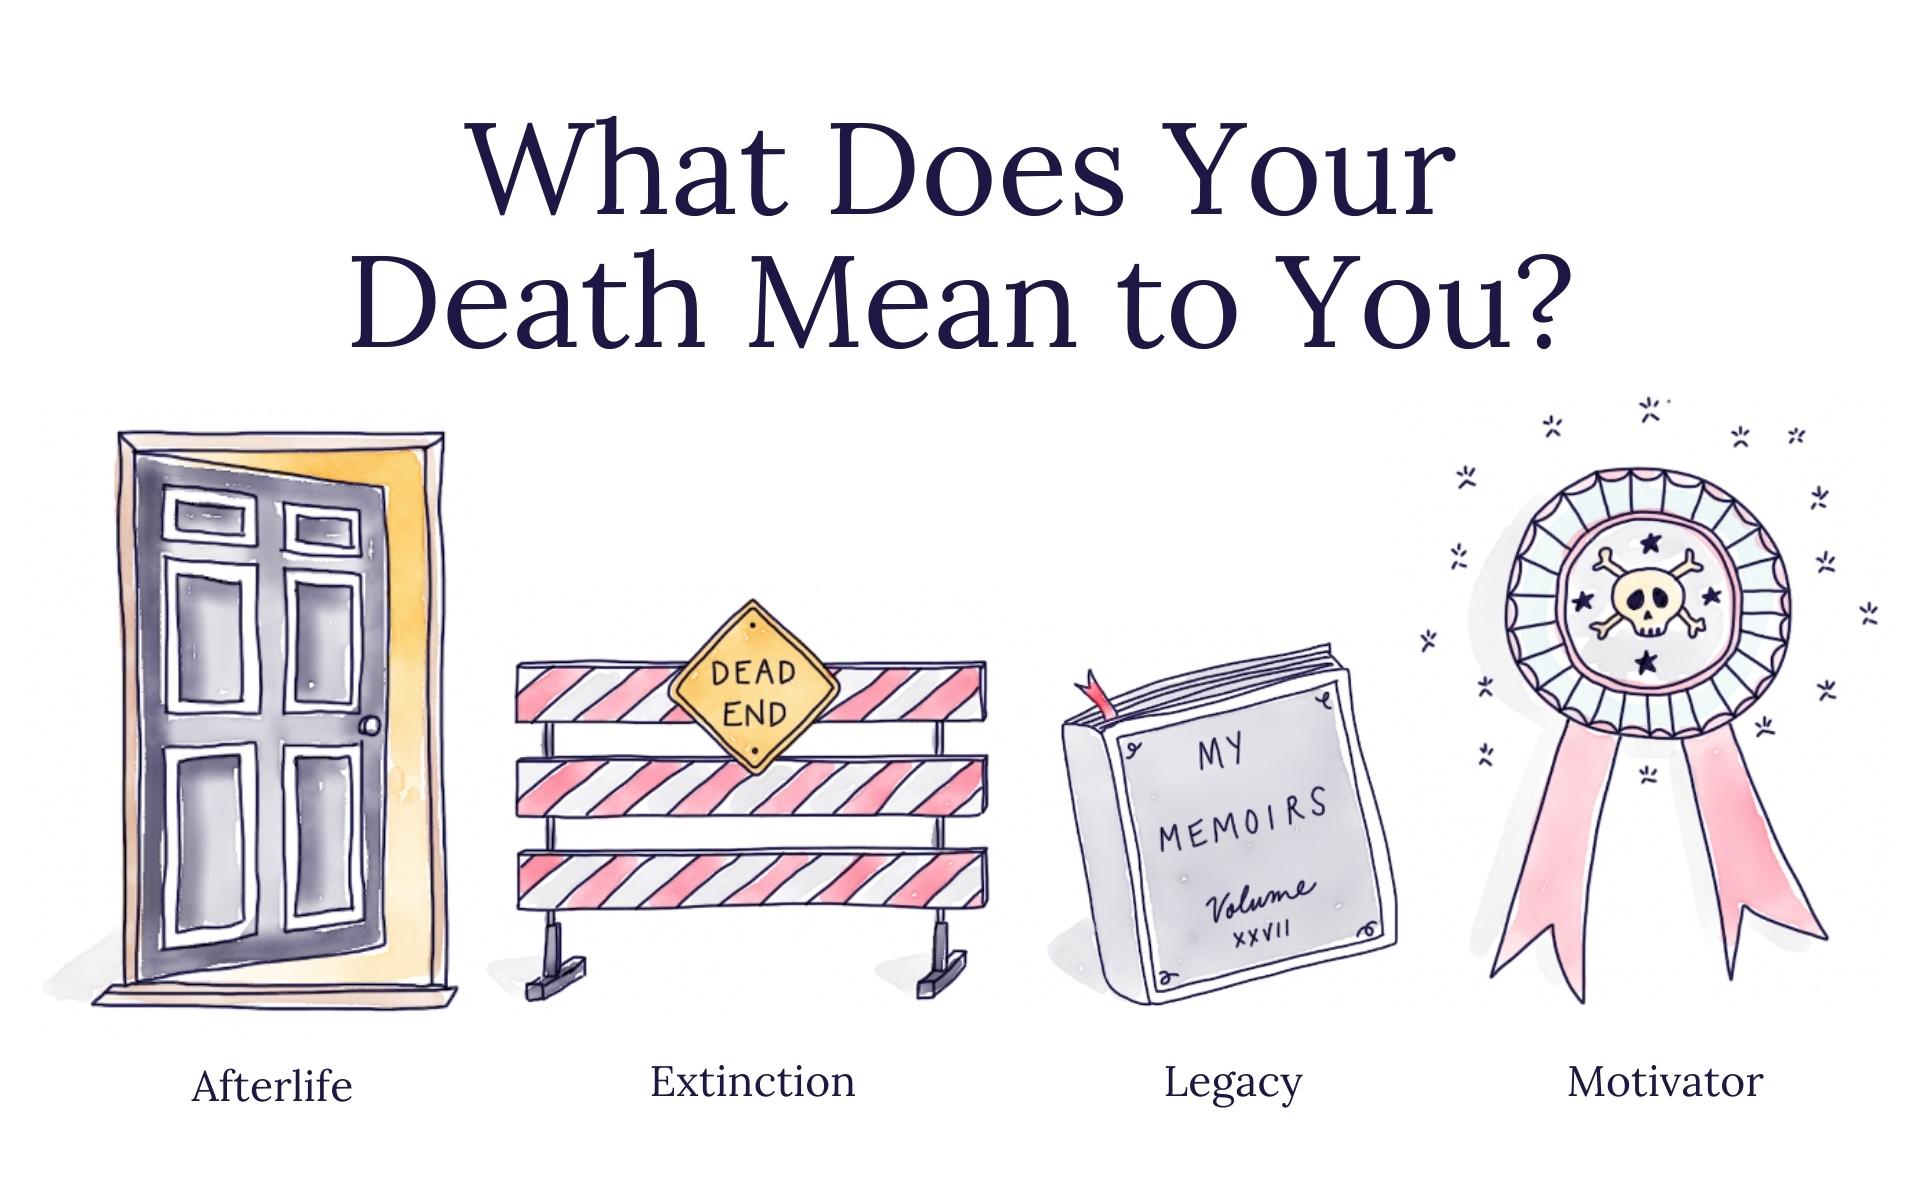 What Does Your Death Mean to You?